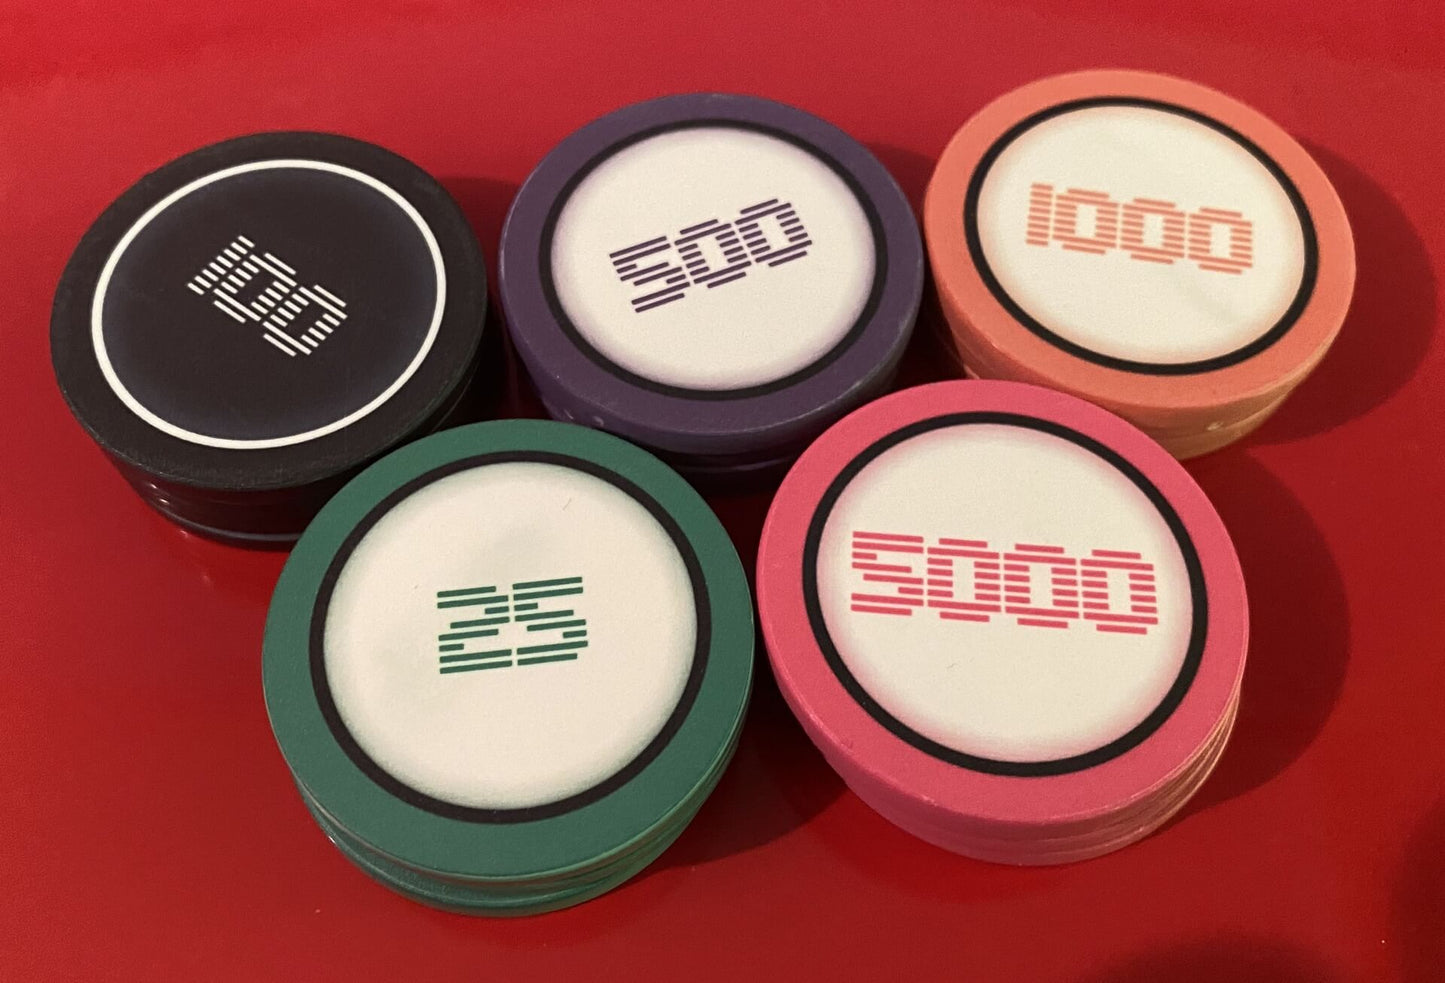 Aurora Poker Gear Custom Game Tokens - Kevin McKinley Minimalist Video Game-themed Poker Chips - Set of custom ceramic video game style poker chips made by Aurora Poker Gear, feature minimalist, retro font and pixel art graphics in red, blue and yellow colors.